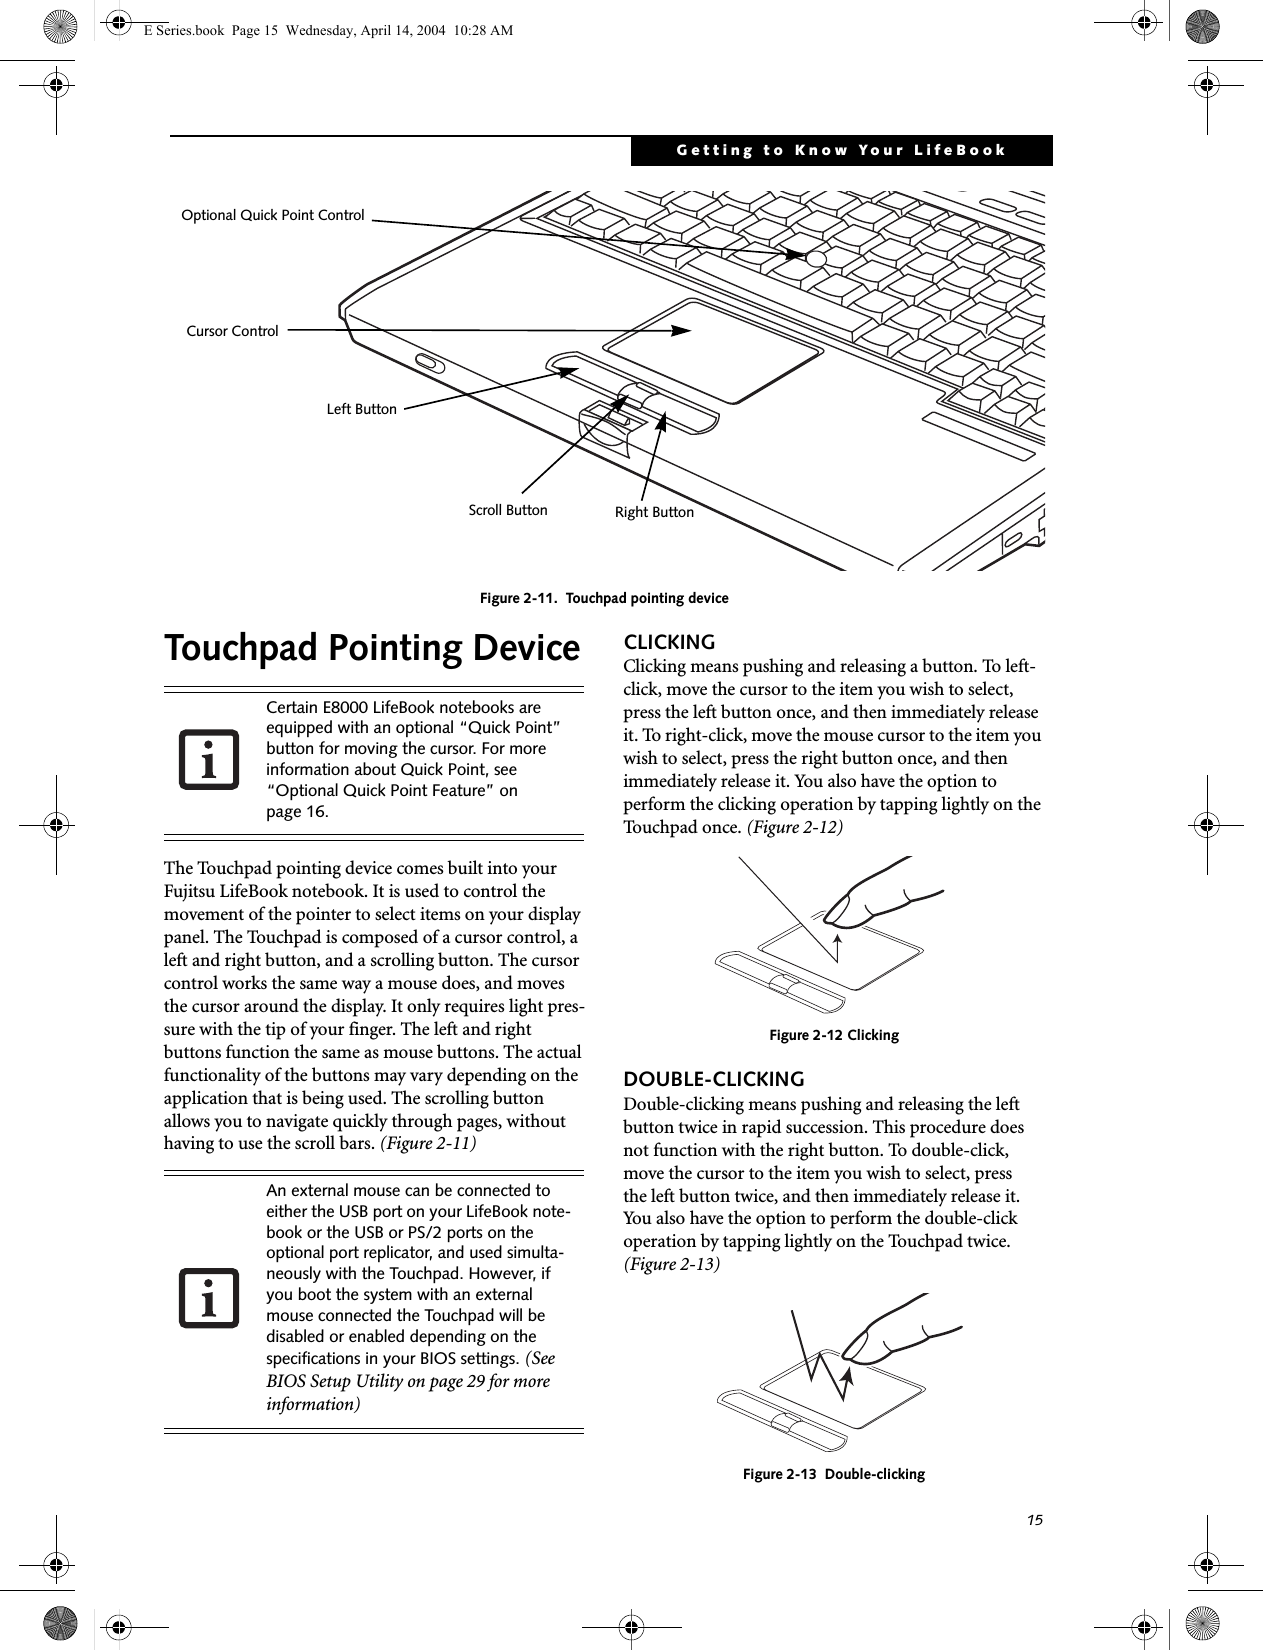 15Getting to Know Your LifeBookFigure 2-11.  Touchpad pointing deviceTouchpad Pointing DeviceThe Touchpad pointing device comes built into your Fujitsu LifeBook notebook. It is used to control the movement of the pointer to select items on your display panel. The Touchpad is composed of a cursor control, a left and right button, and a scrolling button. The cursor control works the same way a mouse does, and moves the cursor around the display. It only requires light pres-sure with the tip of your finger. The left and right buttons function the same as mouse buttons. The actual functionality of the buttons may vary depending on the application that is being used. The scrolling button allows you to navigate quickly through pages, without having to use the scroll bars. (Figure 2-11)CLICKINGClicking means pushing and releasing a button. To left-click, move the cursor to the item you wish to select, press the left button once, and then immediately release it. To right-click, move the mouse cursor to the item you wish to select, press the right button once, and then immediately release it. You also have the option to perform the clicking operation by tapping lightly on the Touchpad once. (Figure 2-12)Figure 2-12 ClickingDOUBLE-CLICKINGDouble-clicking means pushing and releasing the left button twice in rapid succession. This procedure does not function with the right button. To double-click, move the cursor to the item you wish to select, pressthe left button twice, and then immediately release it. You also have the option to perform the double-click operation by tapping lightly on the Touchpad twice. (Figure 2-13)Figure 2-13  Double-clickingCursor ControlLeft ButtonRight ButtonScroll ButtonOptional Quick Point ControlCertain E8000 LifeBook notebooks are equipped with an optional “Quick Point” button for moving the cursor. For more information about Quick Point, see “Optional Quick Point Feature” on page 16.An external mouse can be connected to either the USB port on your LifeBook note-book or the USB or PS/2 ports on the optional port replicator, and used simulta-neously with the Touchpad. However, if you boot the system with an external mouse connected the Touchpad will be disabled or enabled depending on the specifications in your BIOS settings. (See BIOS Setup Utility on page 29 for more information)E Series.book  Page 15  Wednesday, April 14, 2004  10:28 AM